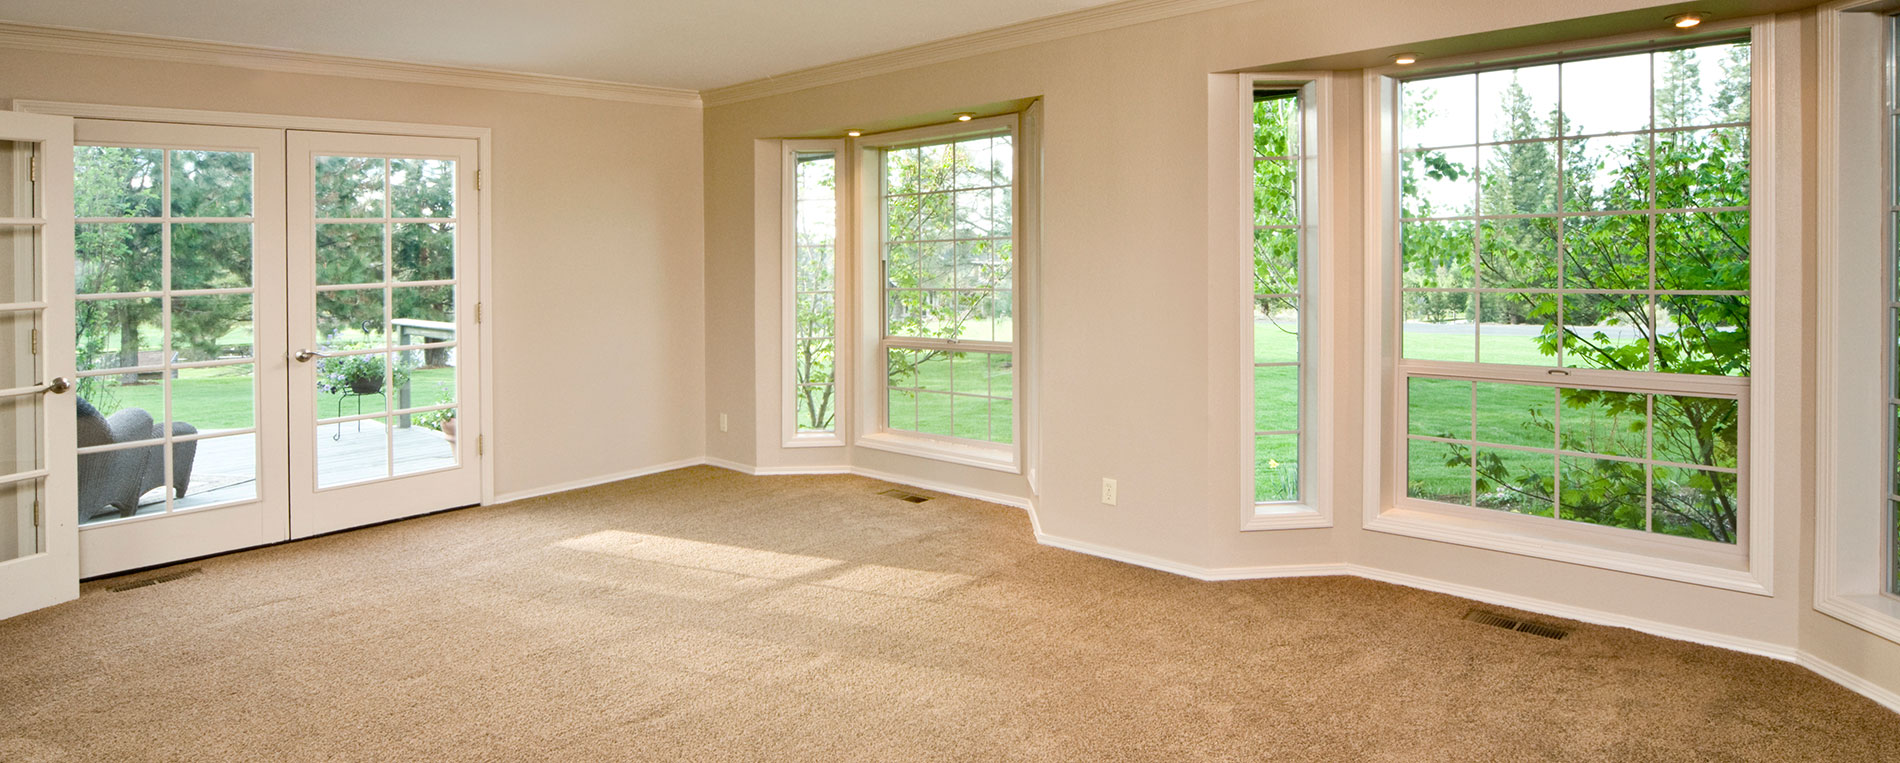 What You Need To Have To Start A Carpet Cleaning Business